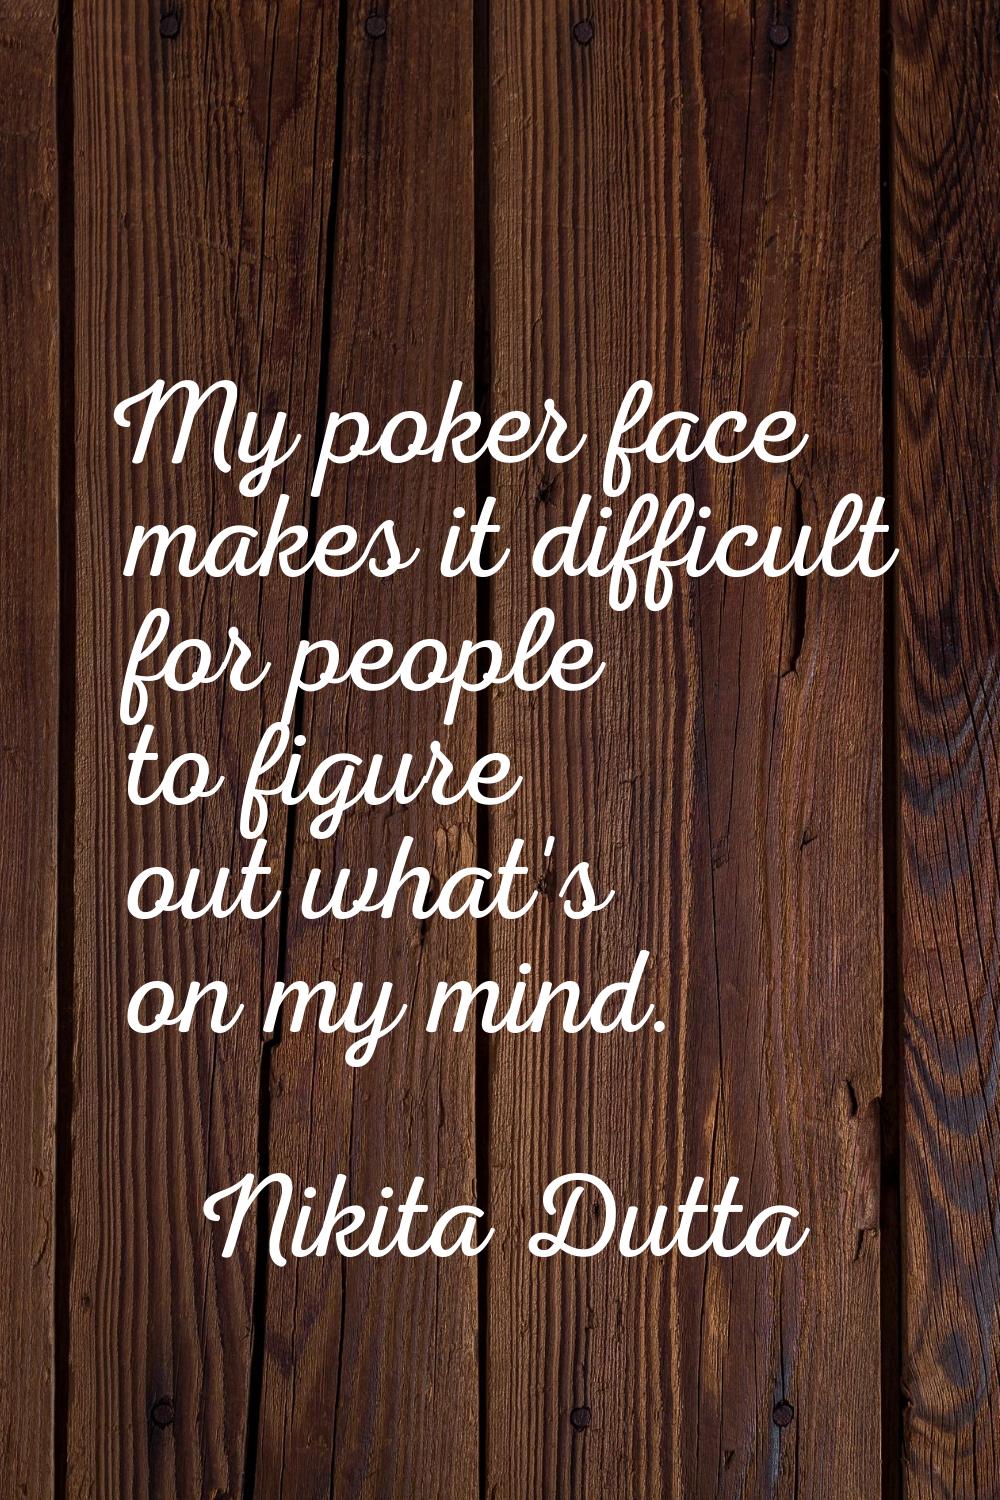 My poker face makes it difficult for people to figure out what's on my mind.